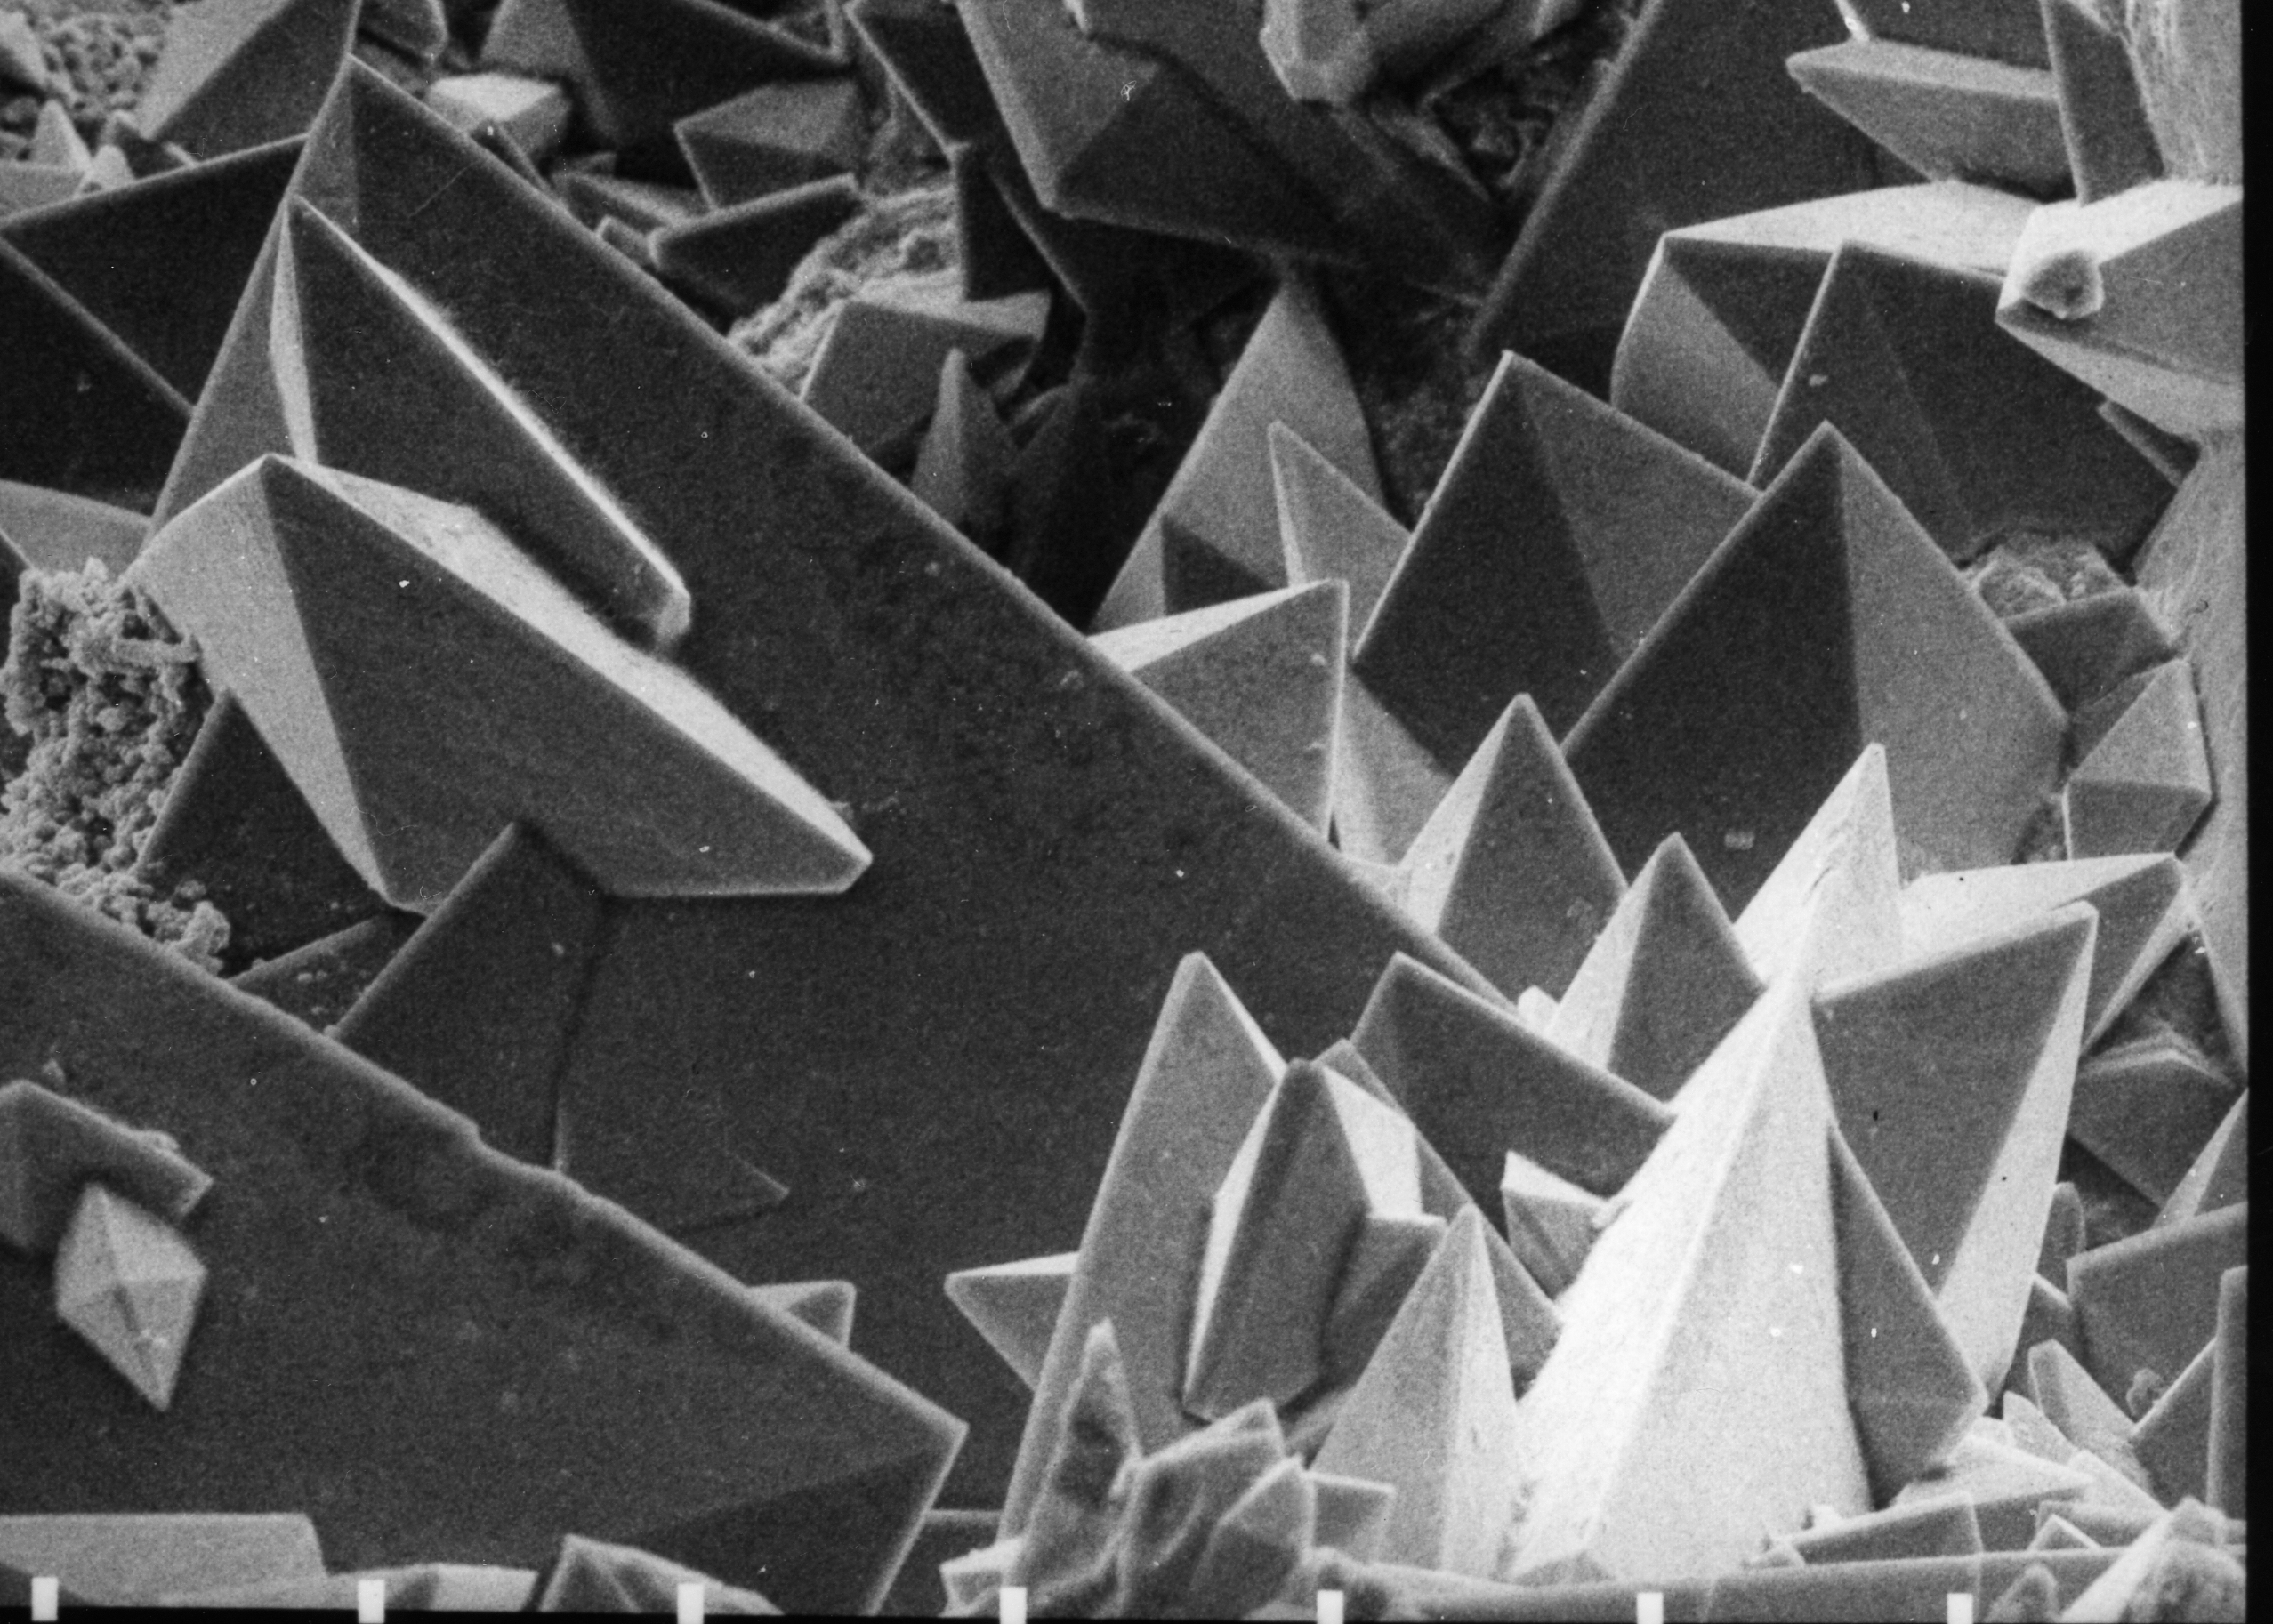 File:Surface of a kidney stone with tetragonal crystals of Weddellite (calcium oxalate dihydrate). REM 21.jpg